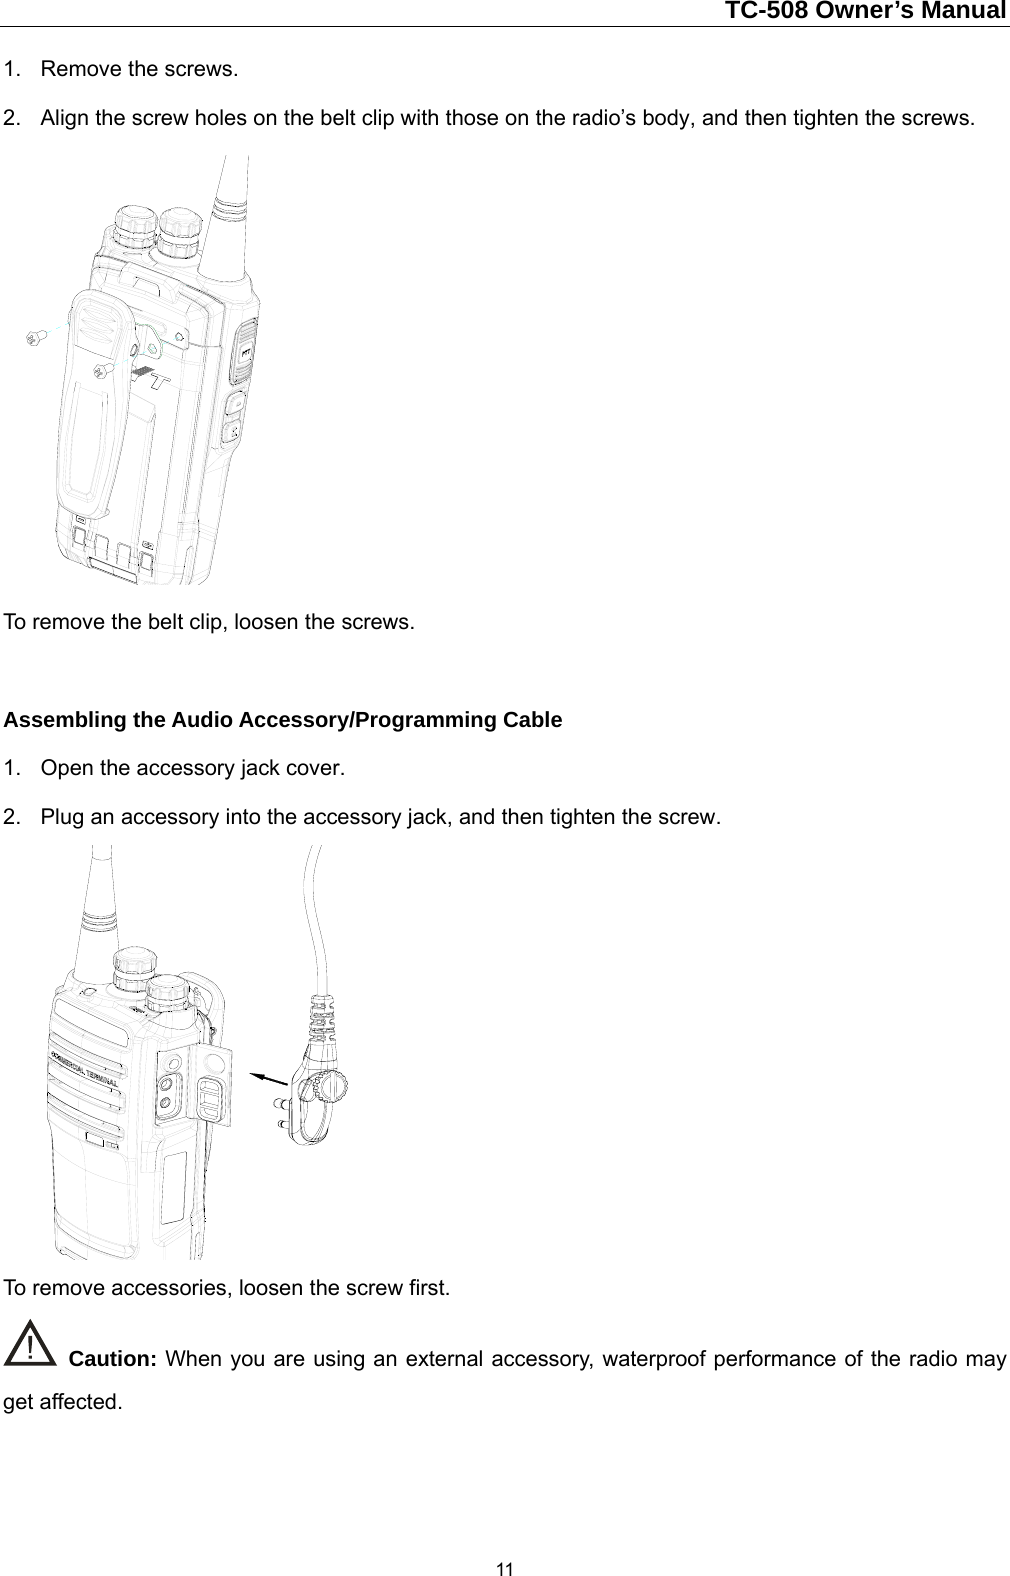                                                                        TC-508 Owner’s Manual  111.  Remove the screws.   2.  Align the screw holes on the belt clip with those on the radio’s body, and then tighten the screws.    To remove the belt clip, loosen the screws.    Assembling the Audio Accessory/Programming Cable 1.  Open the accessory jack cover.   2.  Plug an accessory into the accessory jack, and then tighten the screw.    To remove accessories, loosen the screw first.    Caution: When you are using an external accessory, waterproof performance of the radio may get affected.    